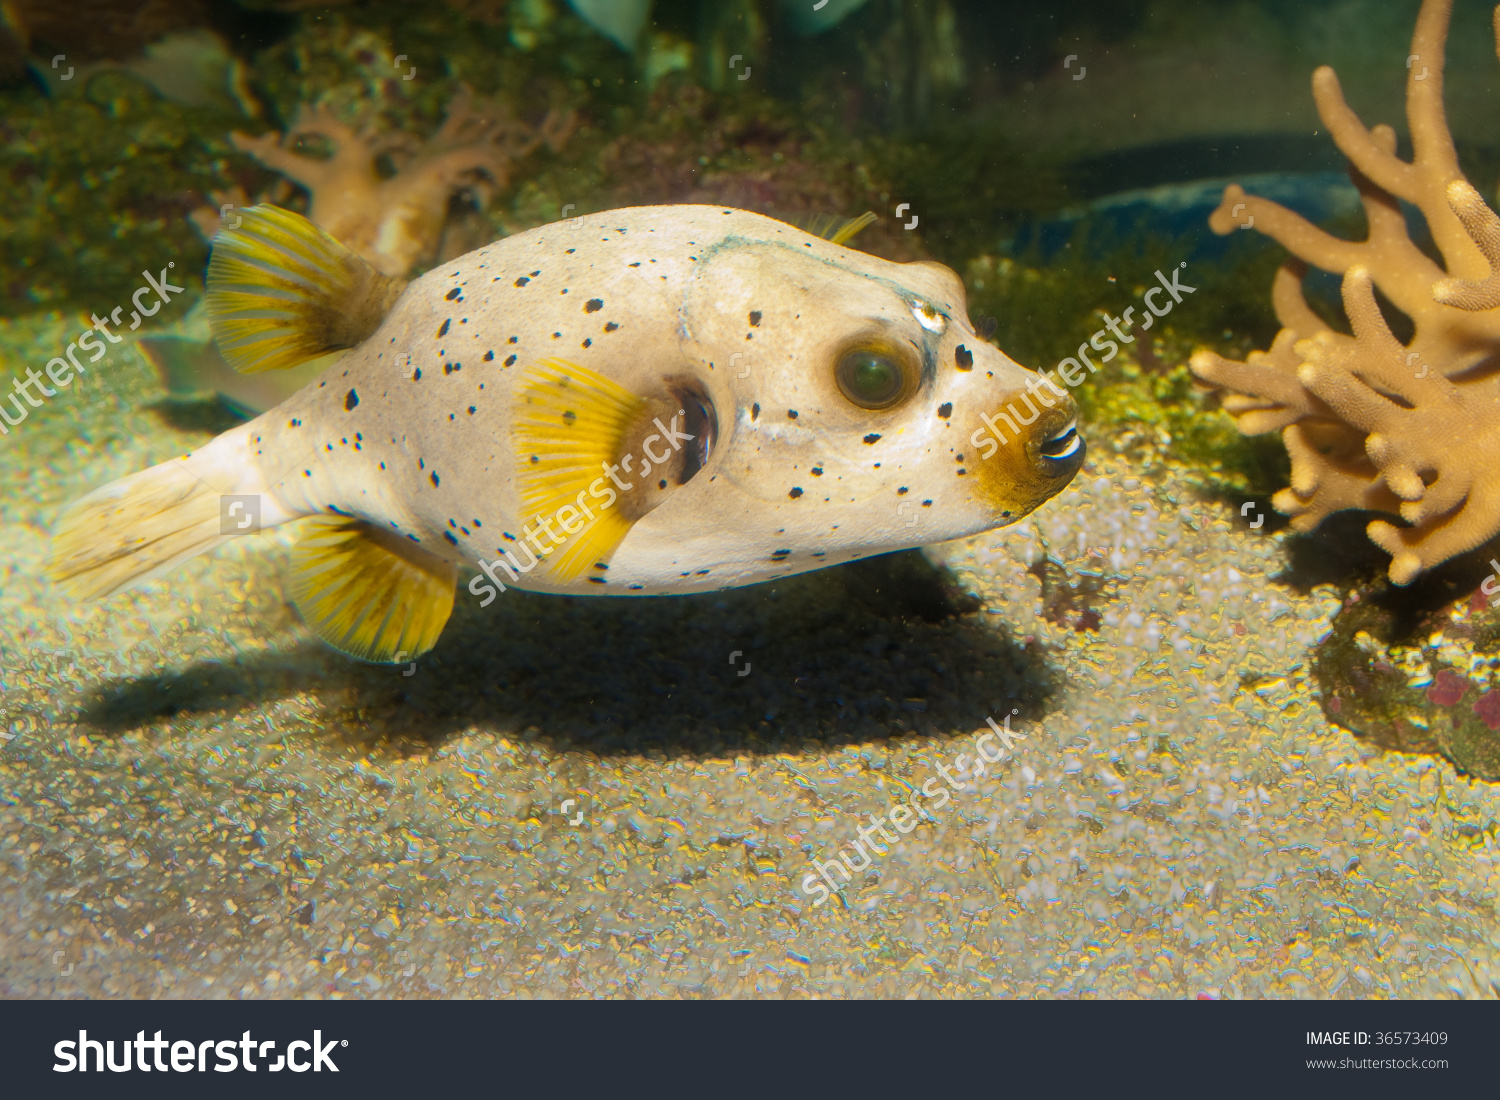 Black Spotted Dog Faced Puffer Fish Stock Photo 36573409.